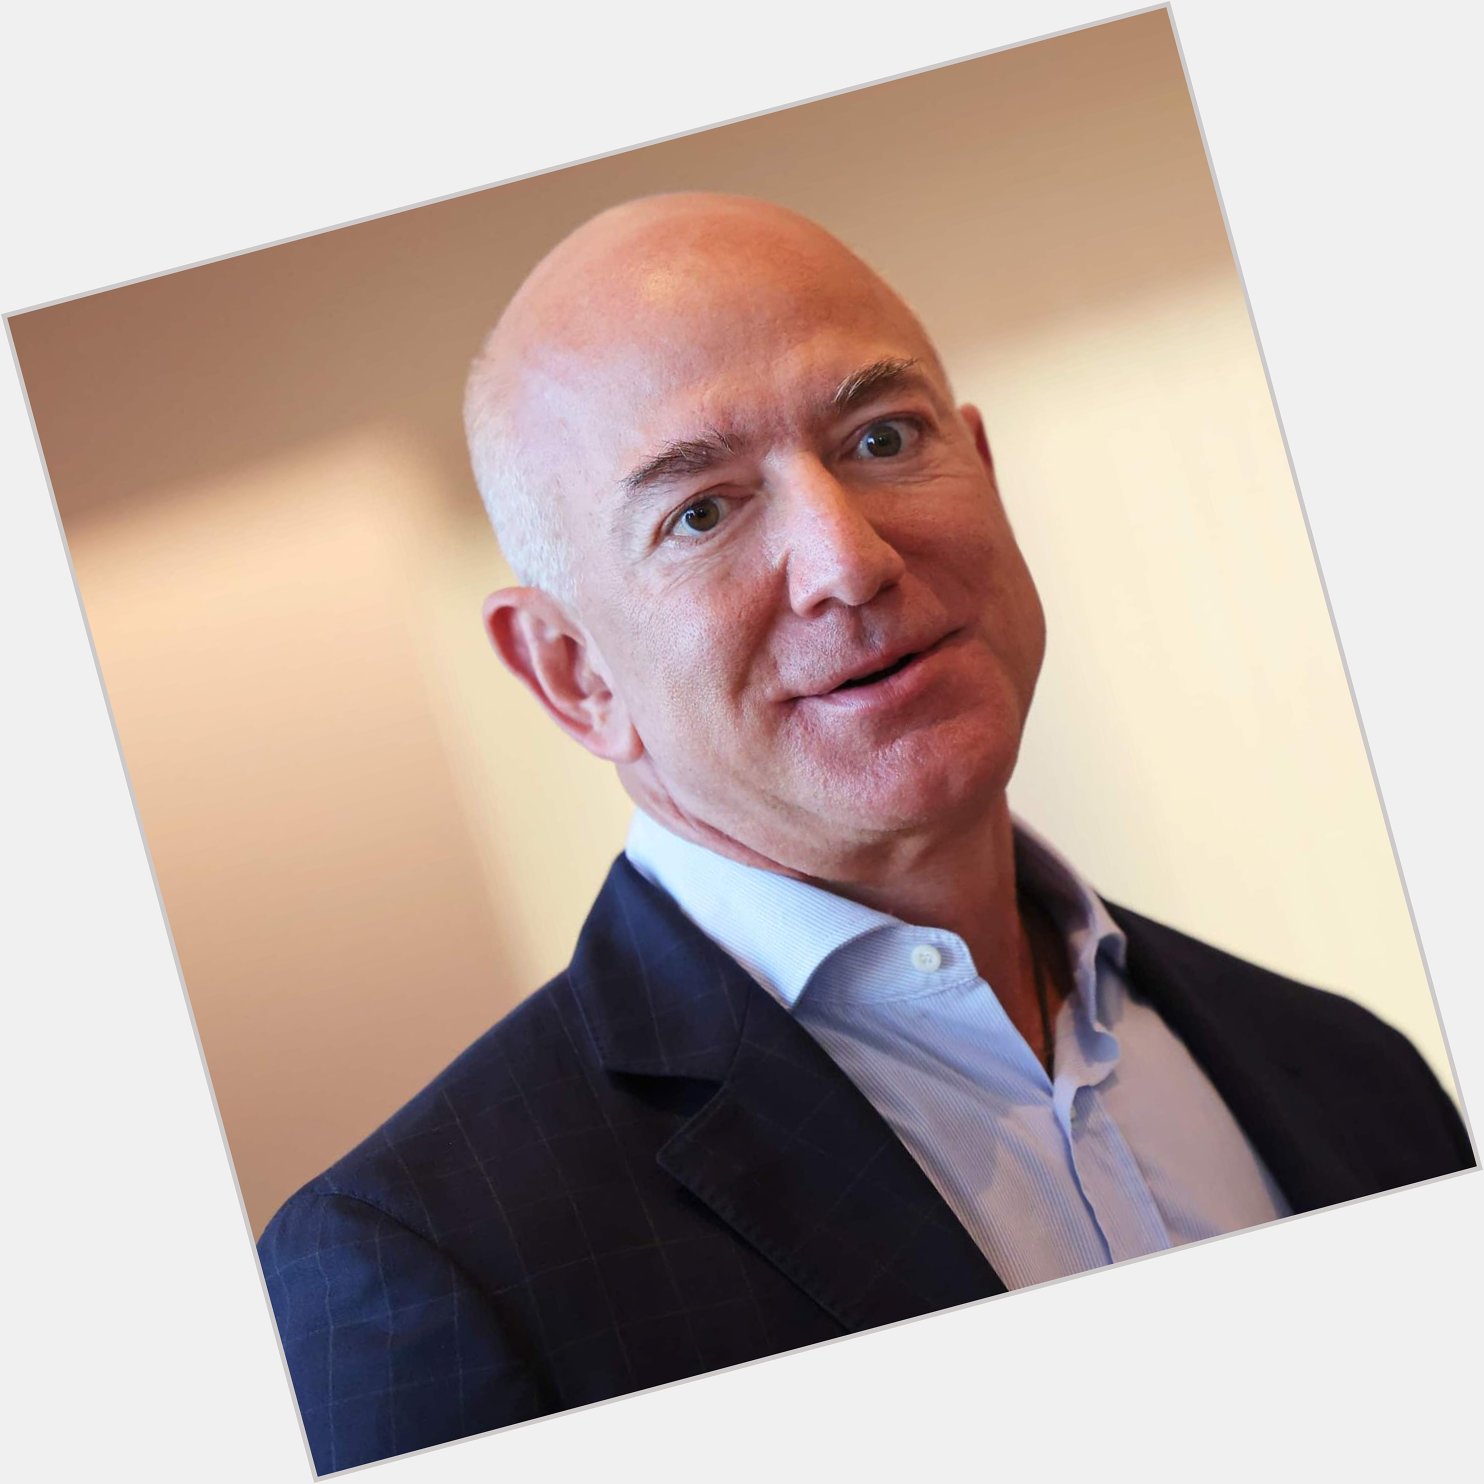 Happy birthday to the 4th richest man in the world, Jeff Bezos. He is 59 today!!  